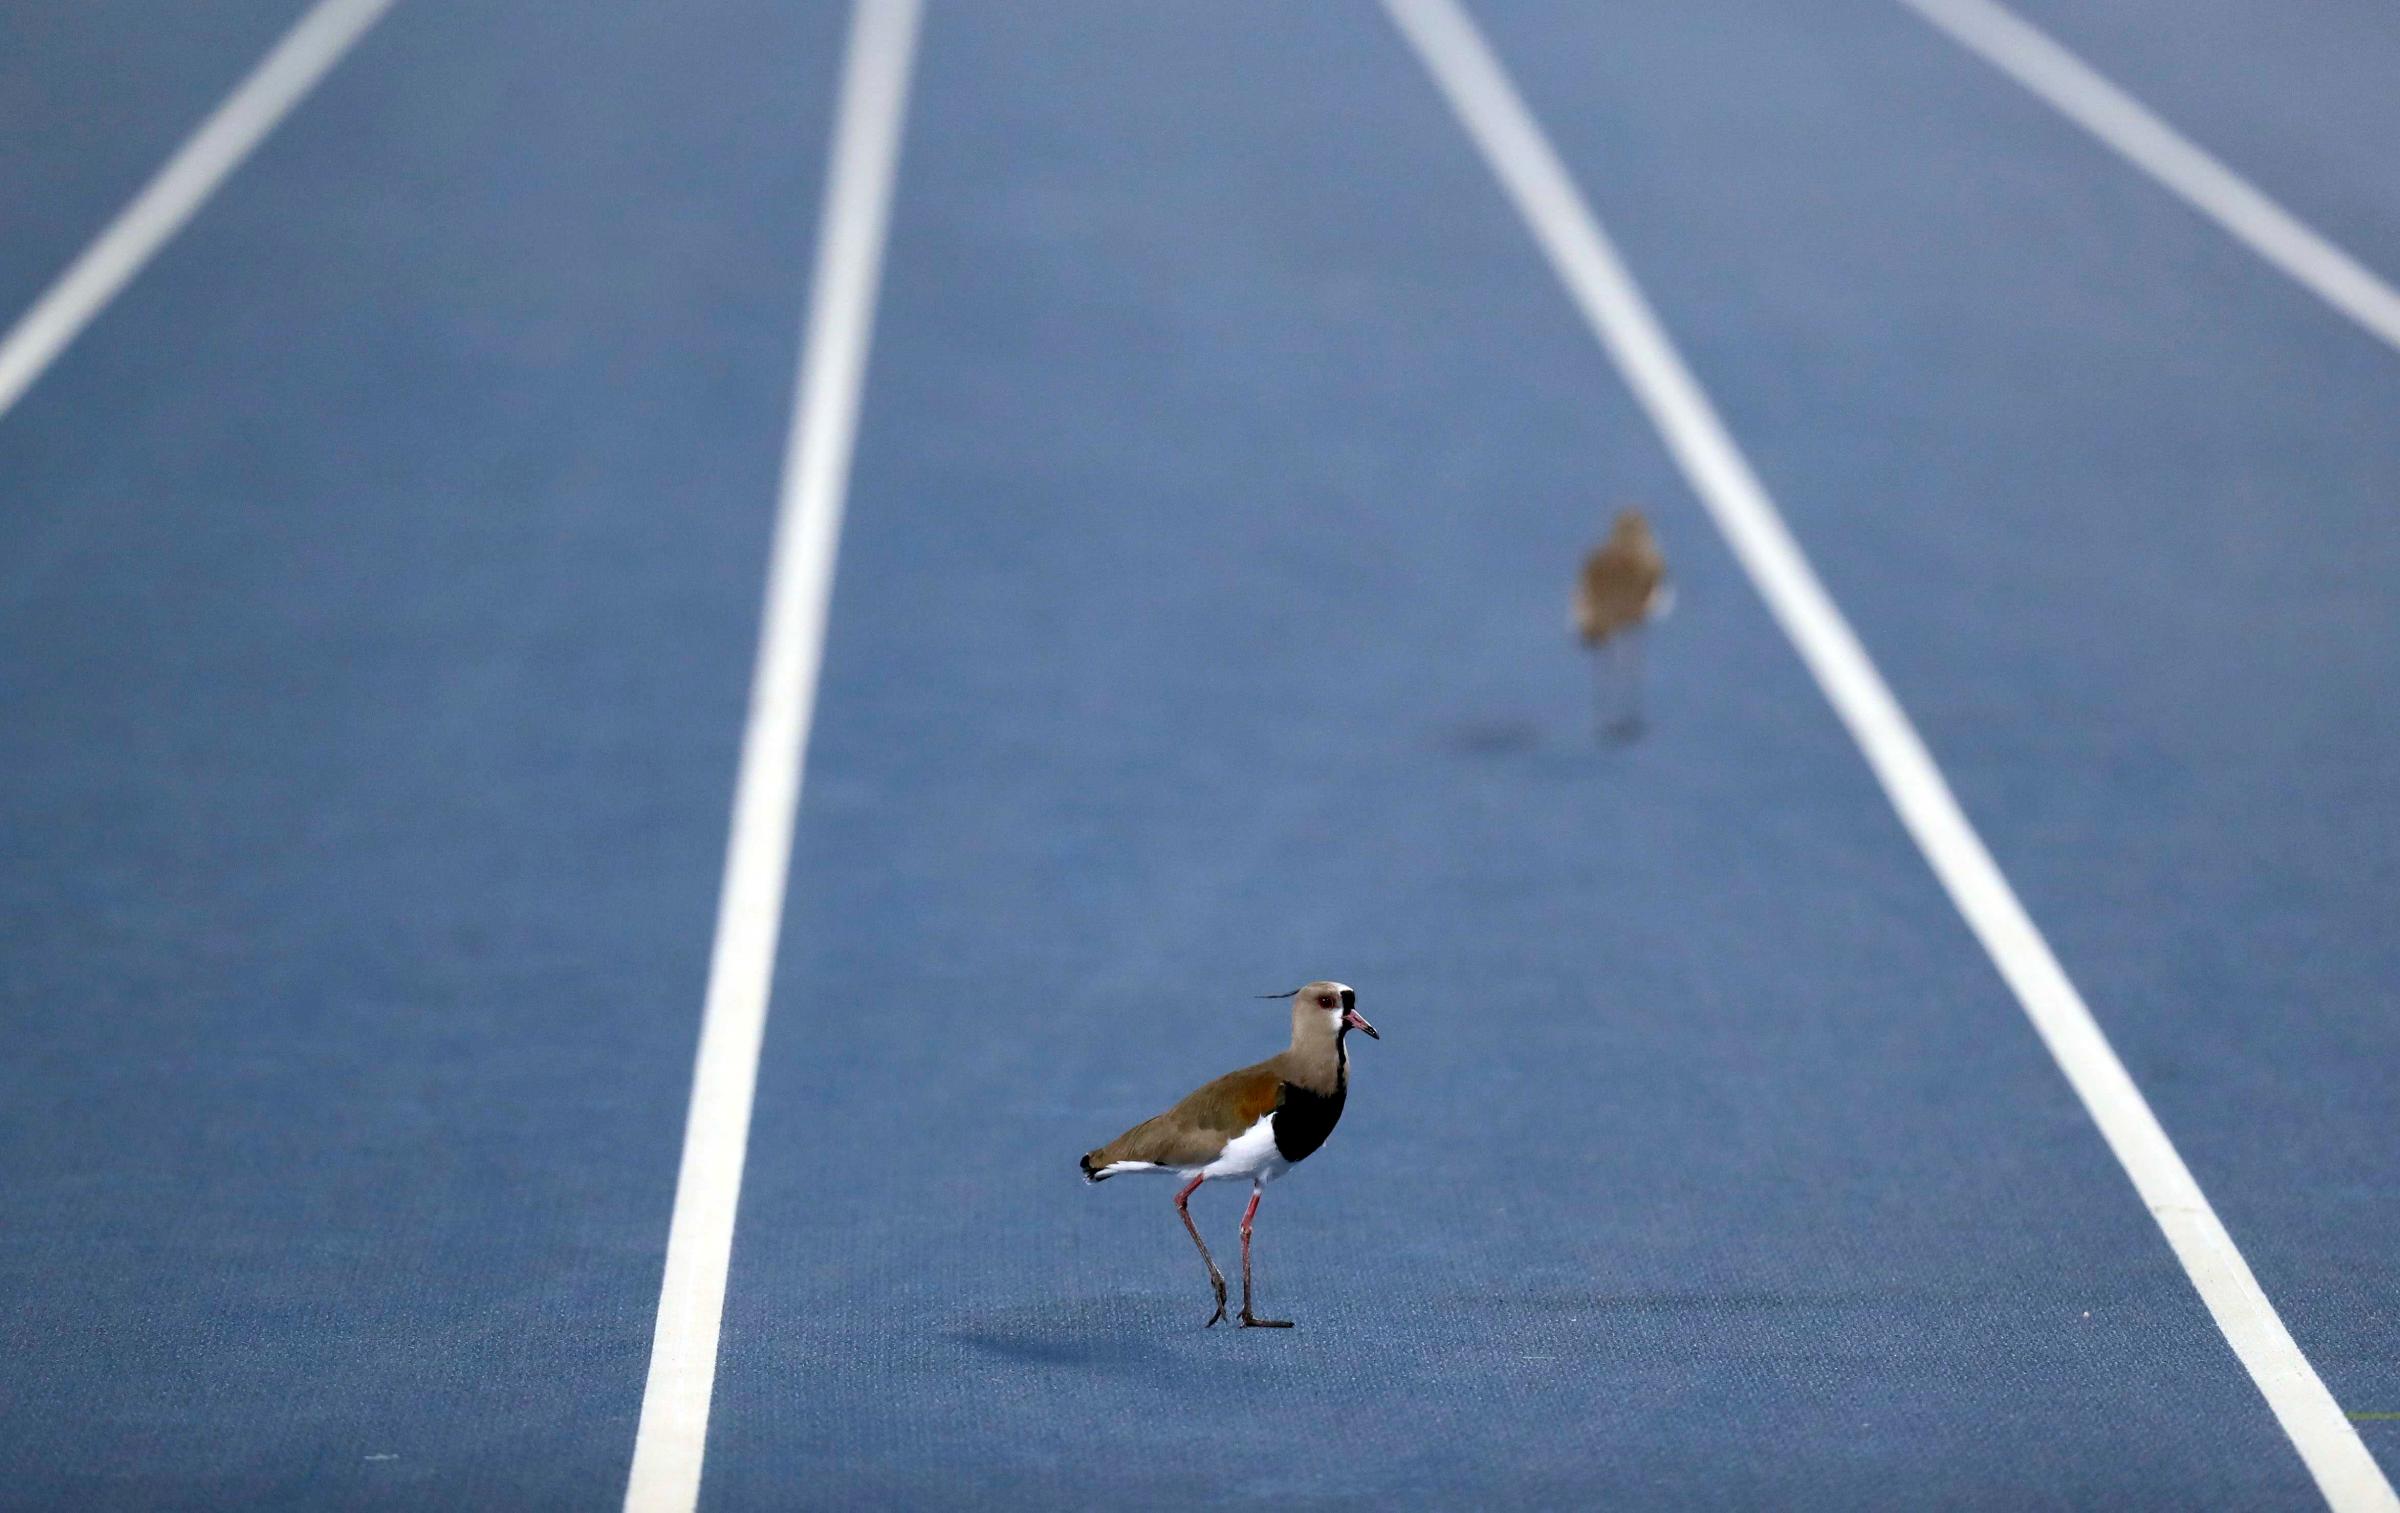 Birds are pictured on the track during the 2016 Rio Olympics, Men's High Jump Final in Rio de Janeiro, Brazil, on Aug. 16, 2016.